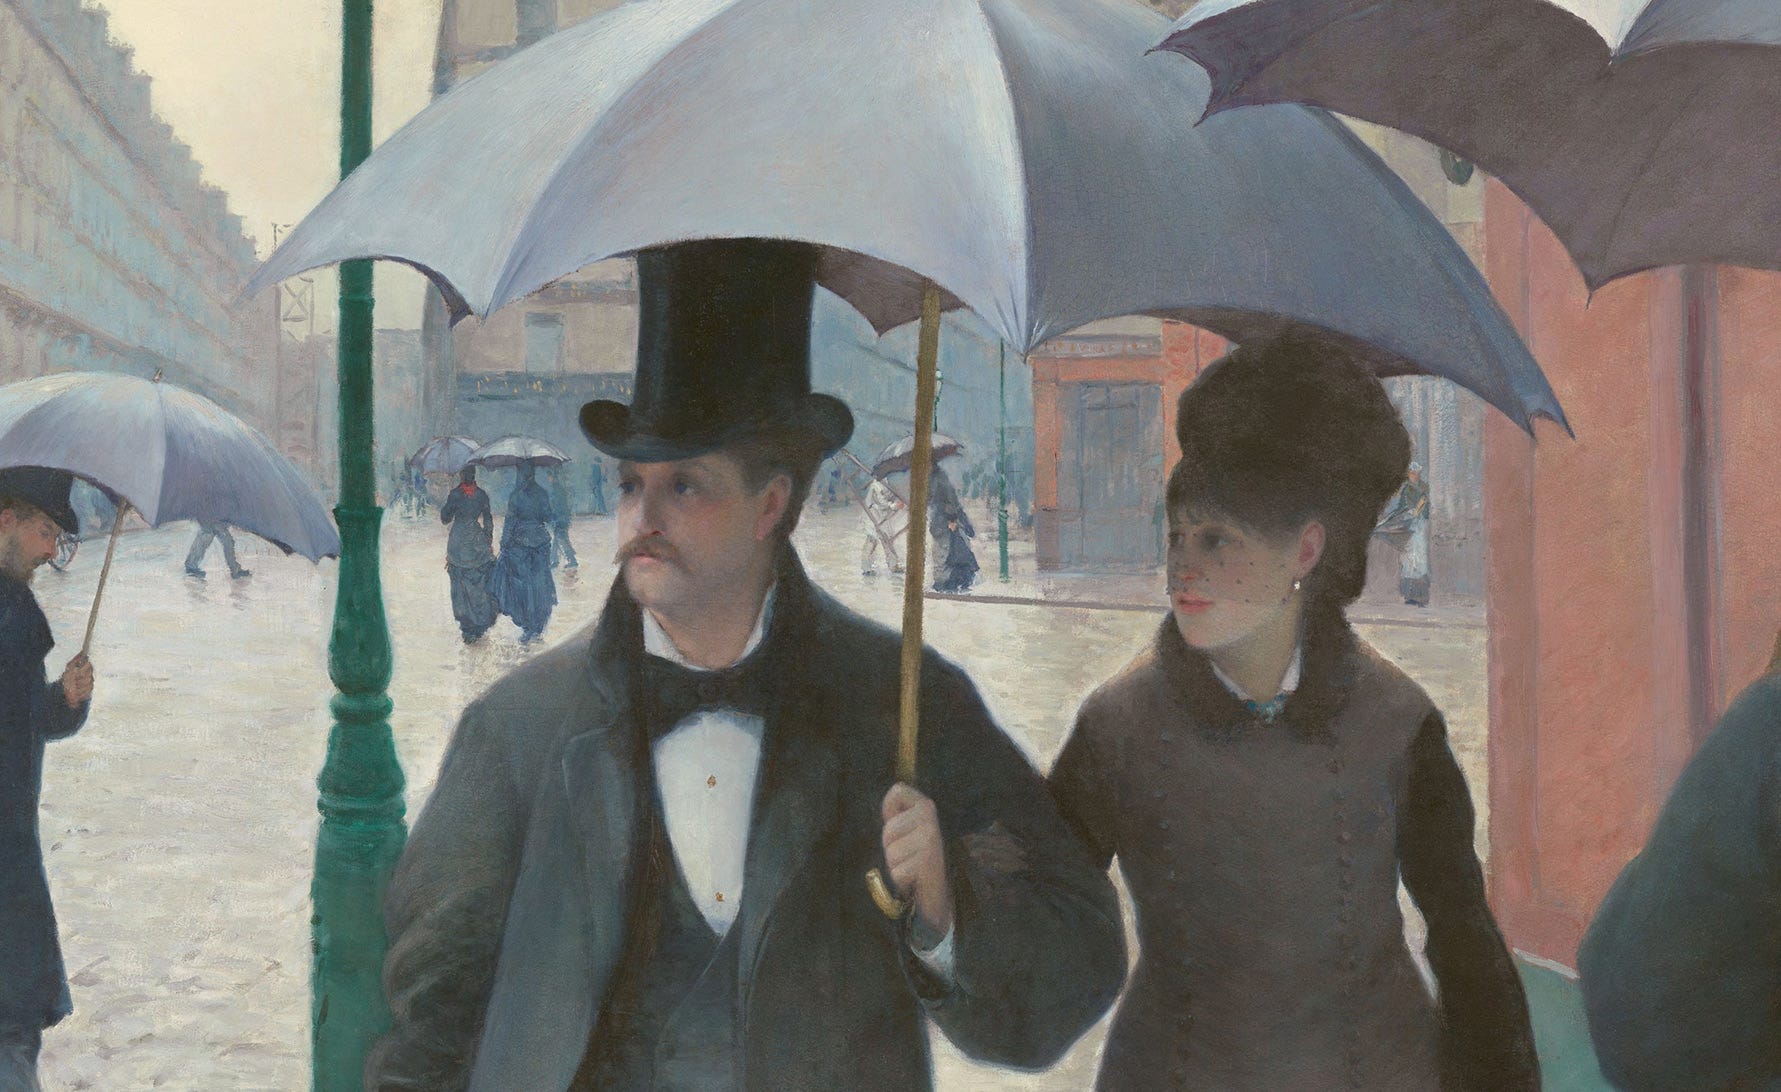 How To Read Paintings Paris Street Rainy Day By Gustave Caillebotte By Christopher P Jones Thinksheet Medium